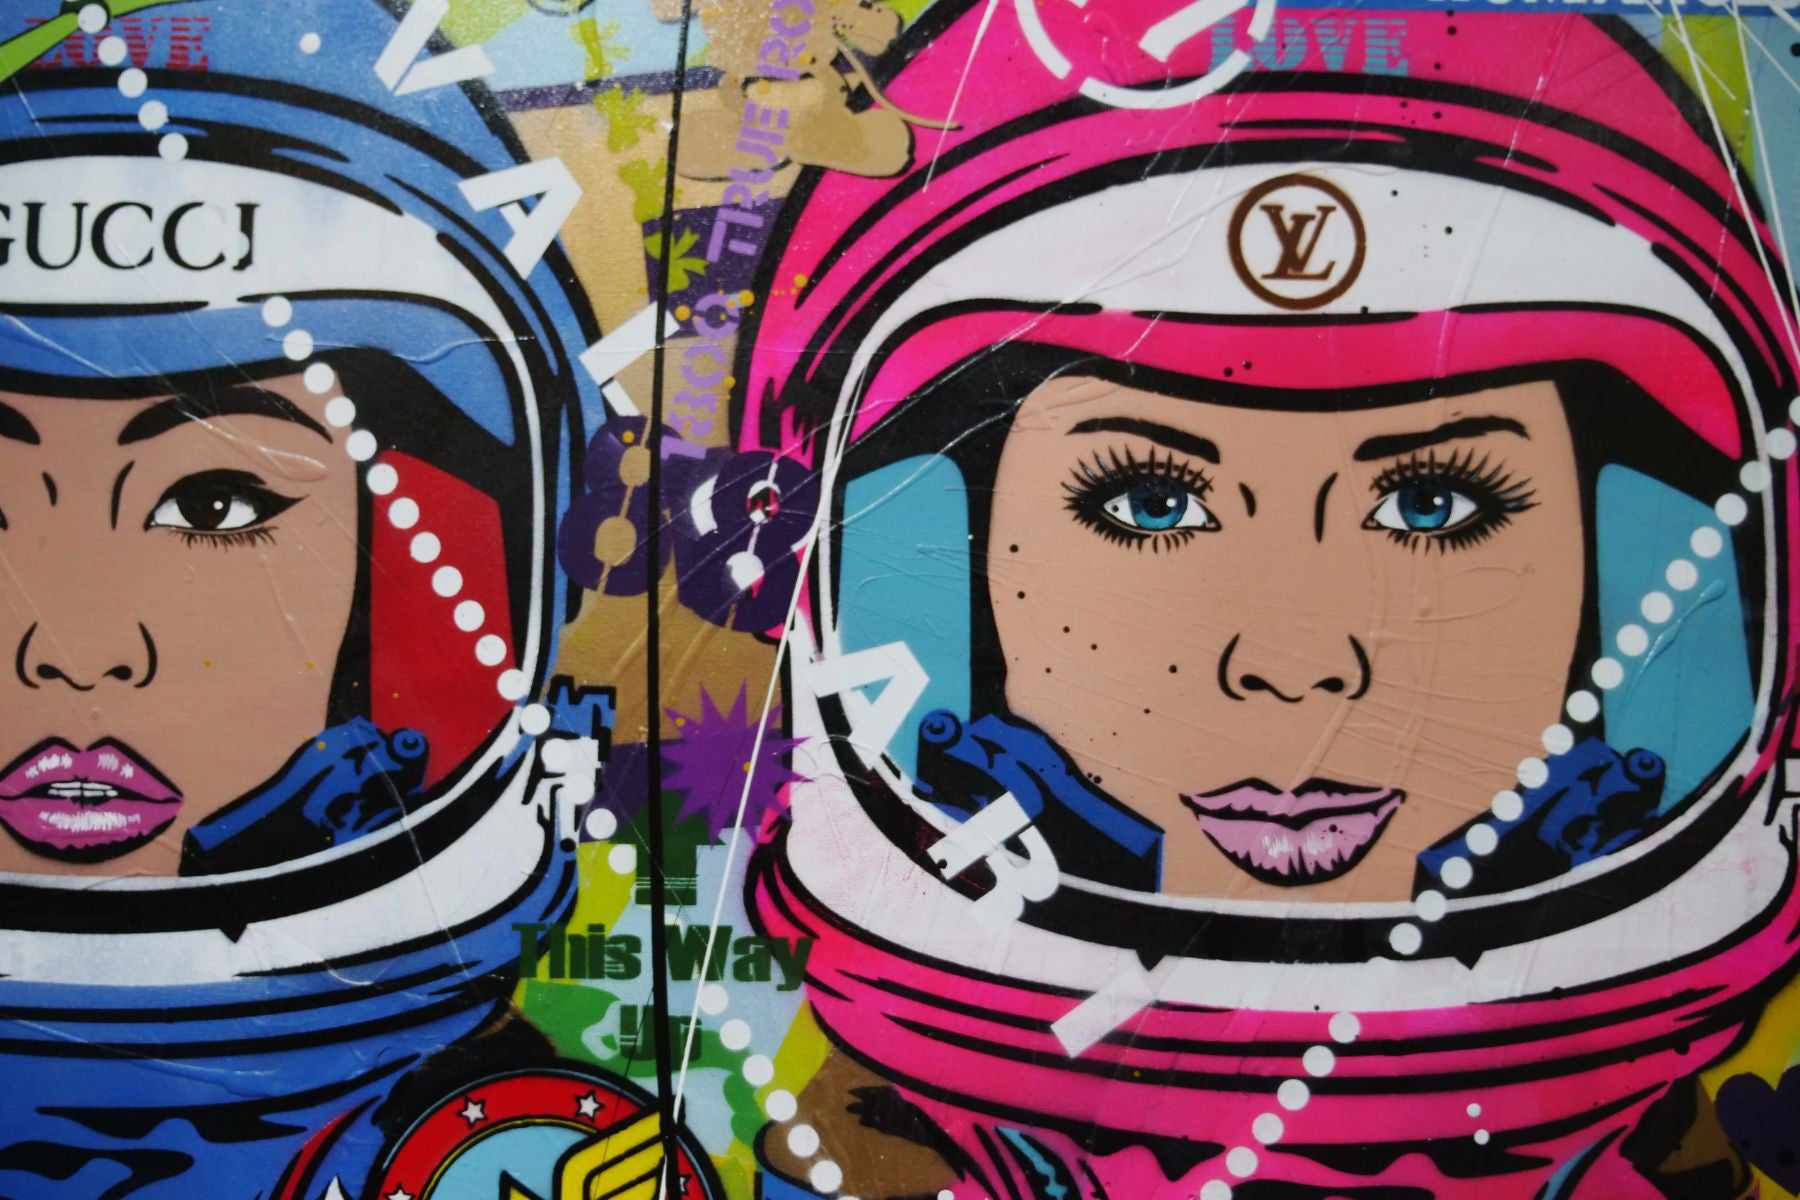 The 5th Cadet 240cm x 100cm Space Cadets Textured Urban Pop Art Painting (SOLD)